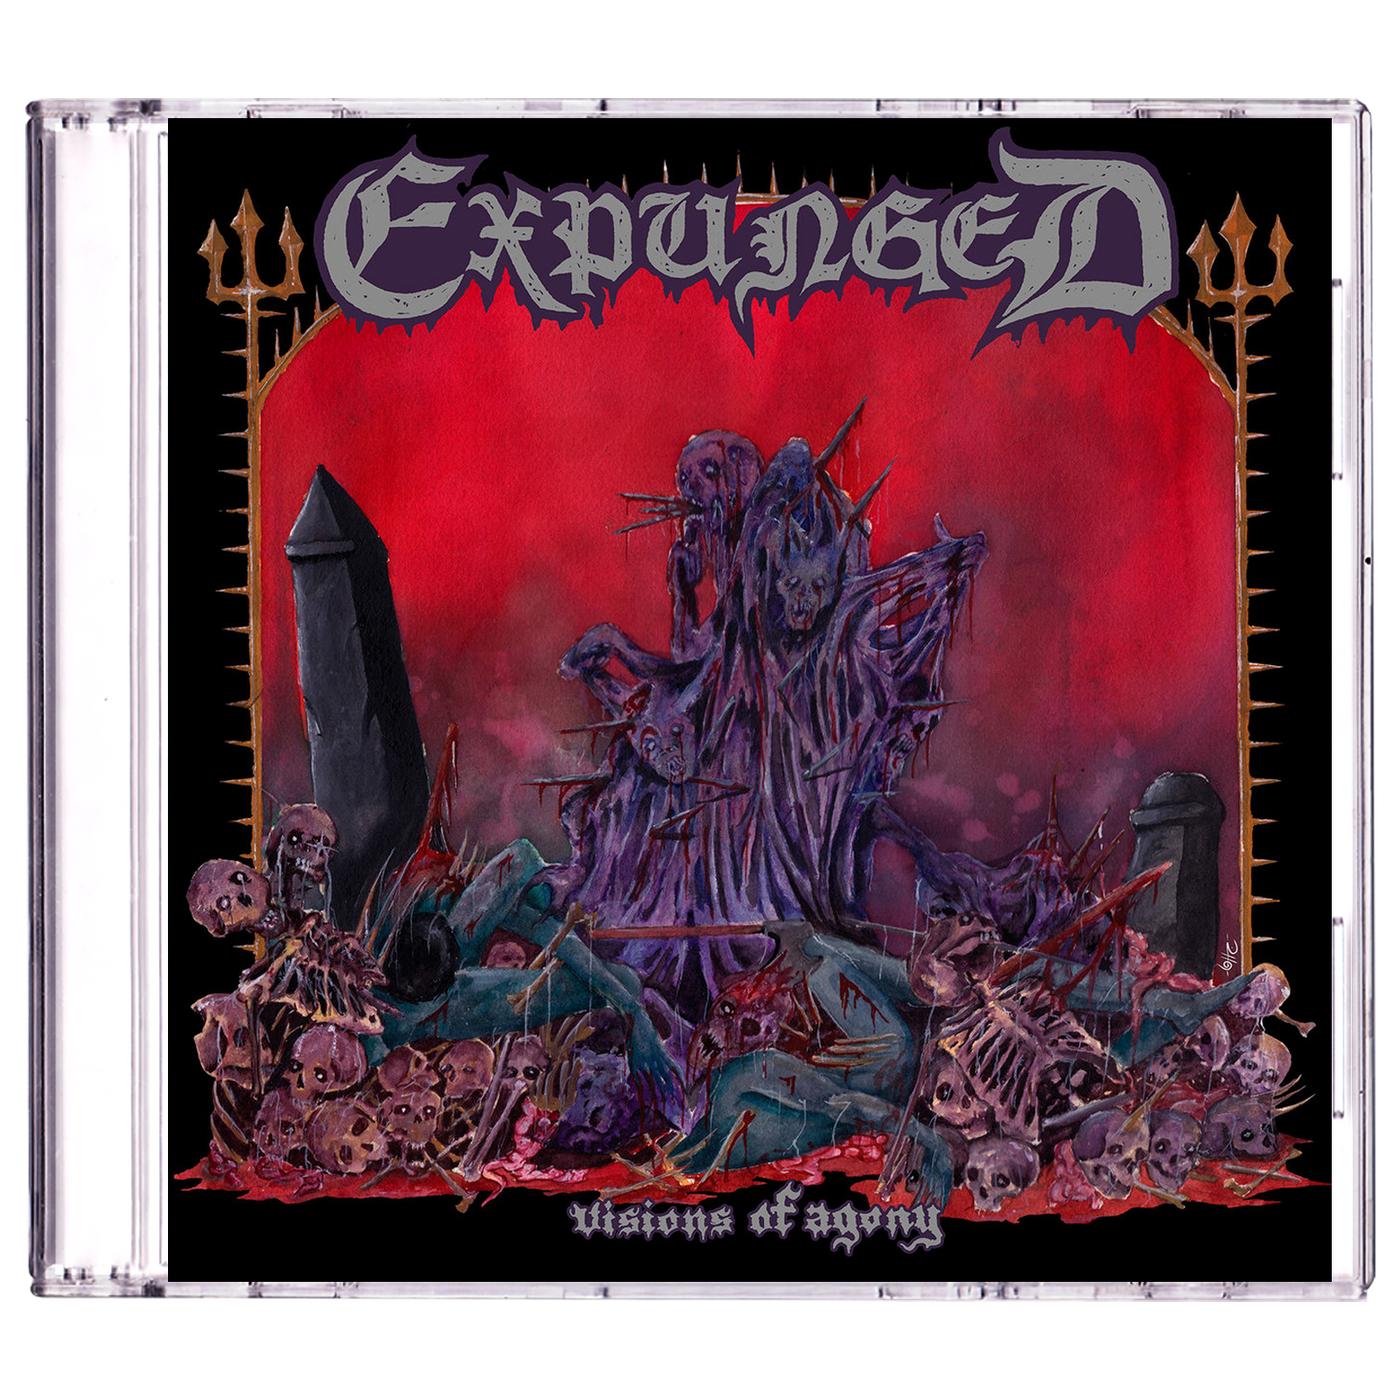 Expunged 'Visions of Agony' CD